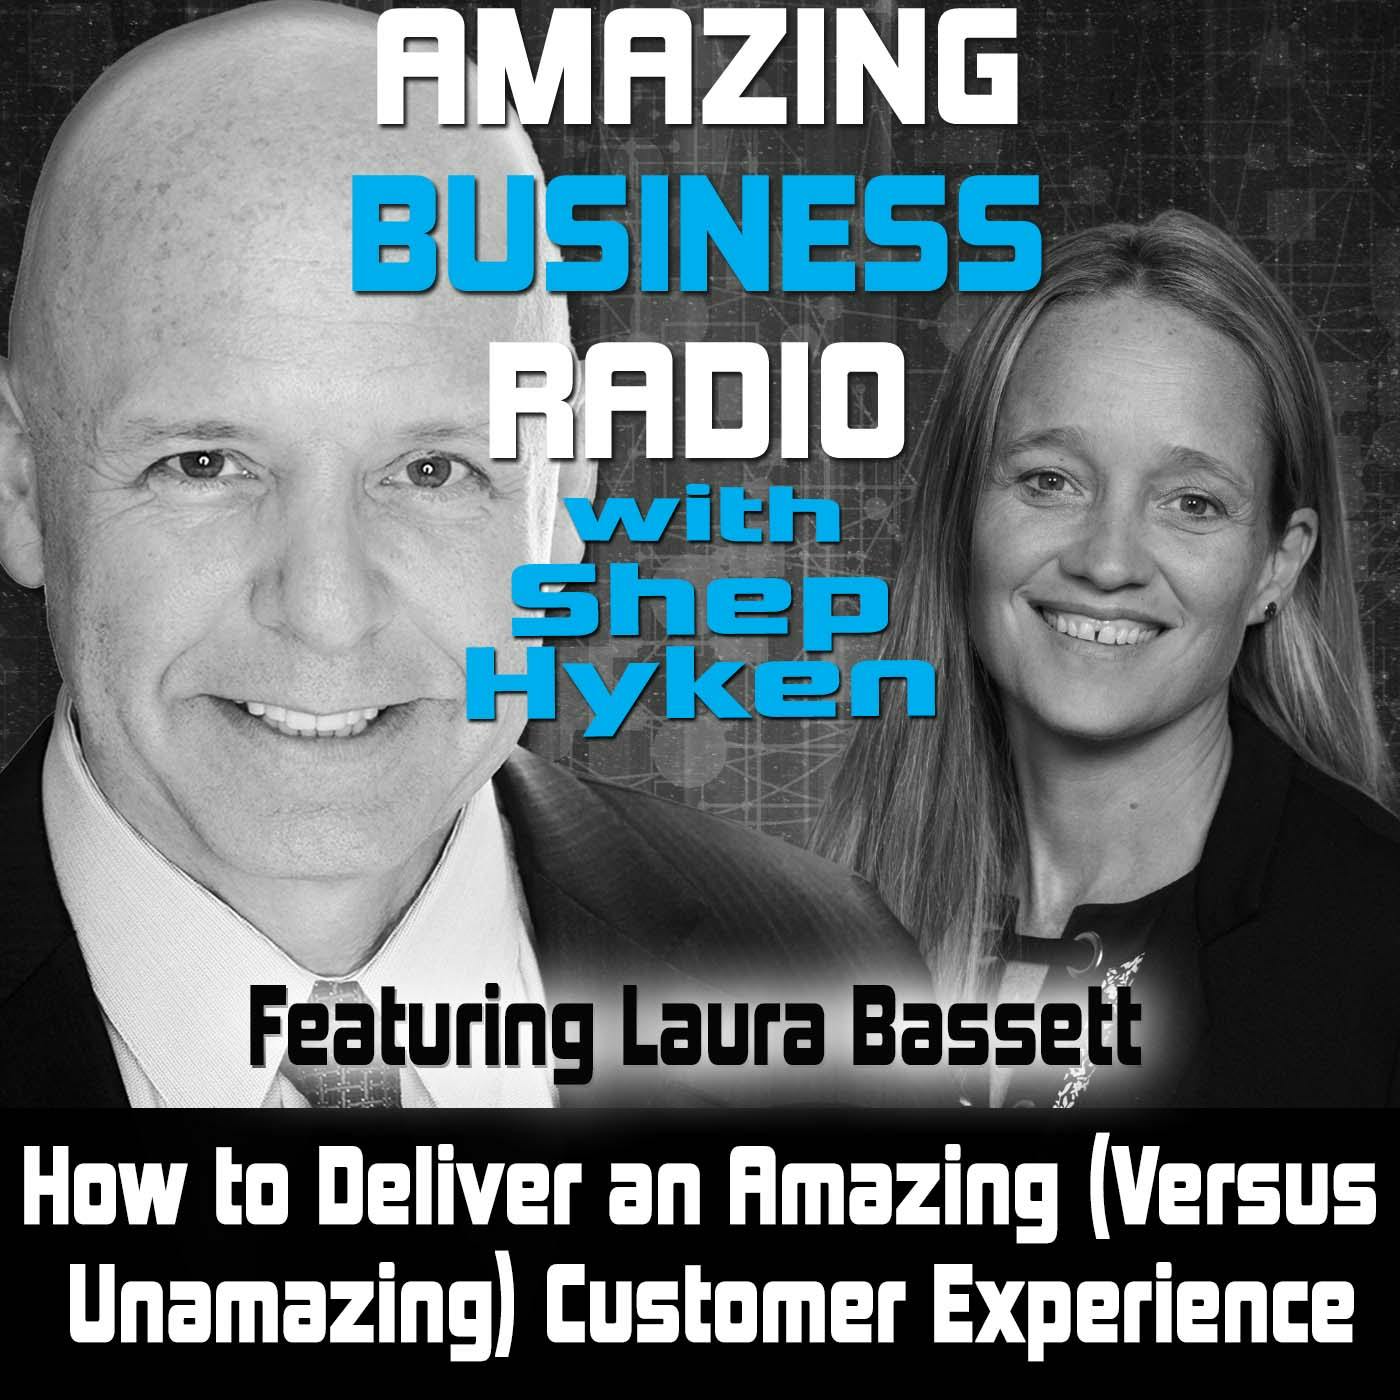 How to Deliver an Amazing (Versus Unamazing) Customer Experience Featuring Laura Bassett